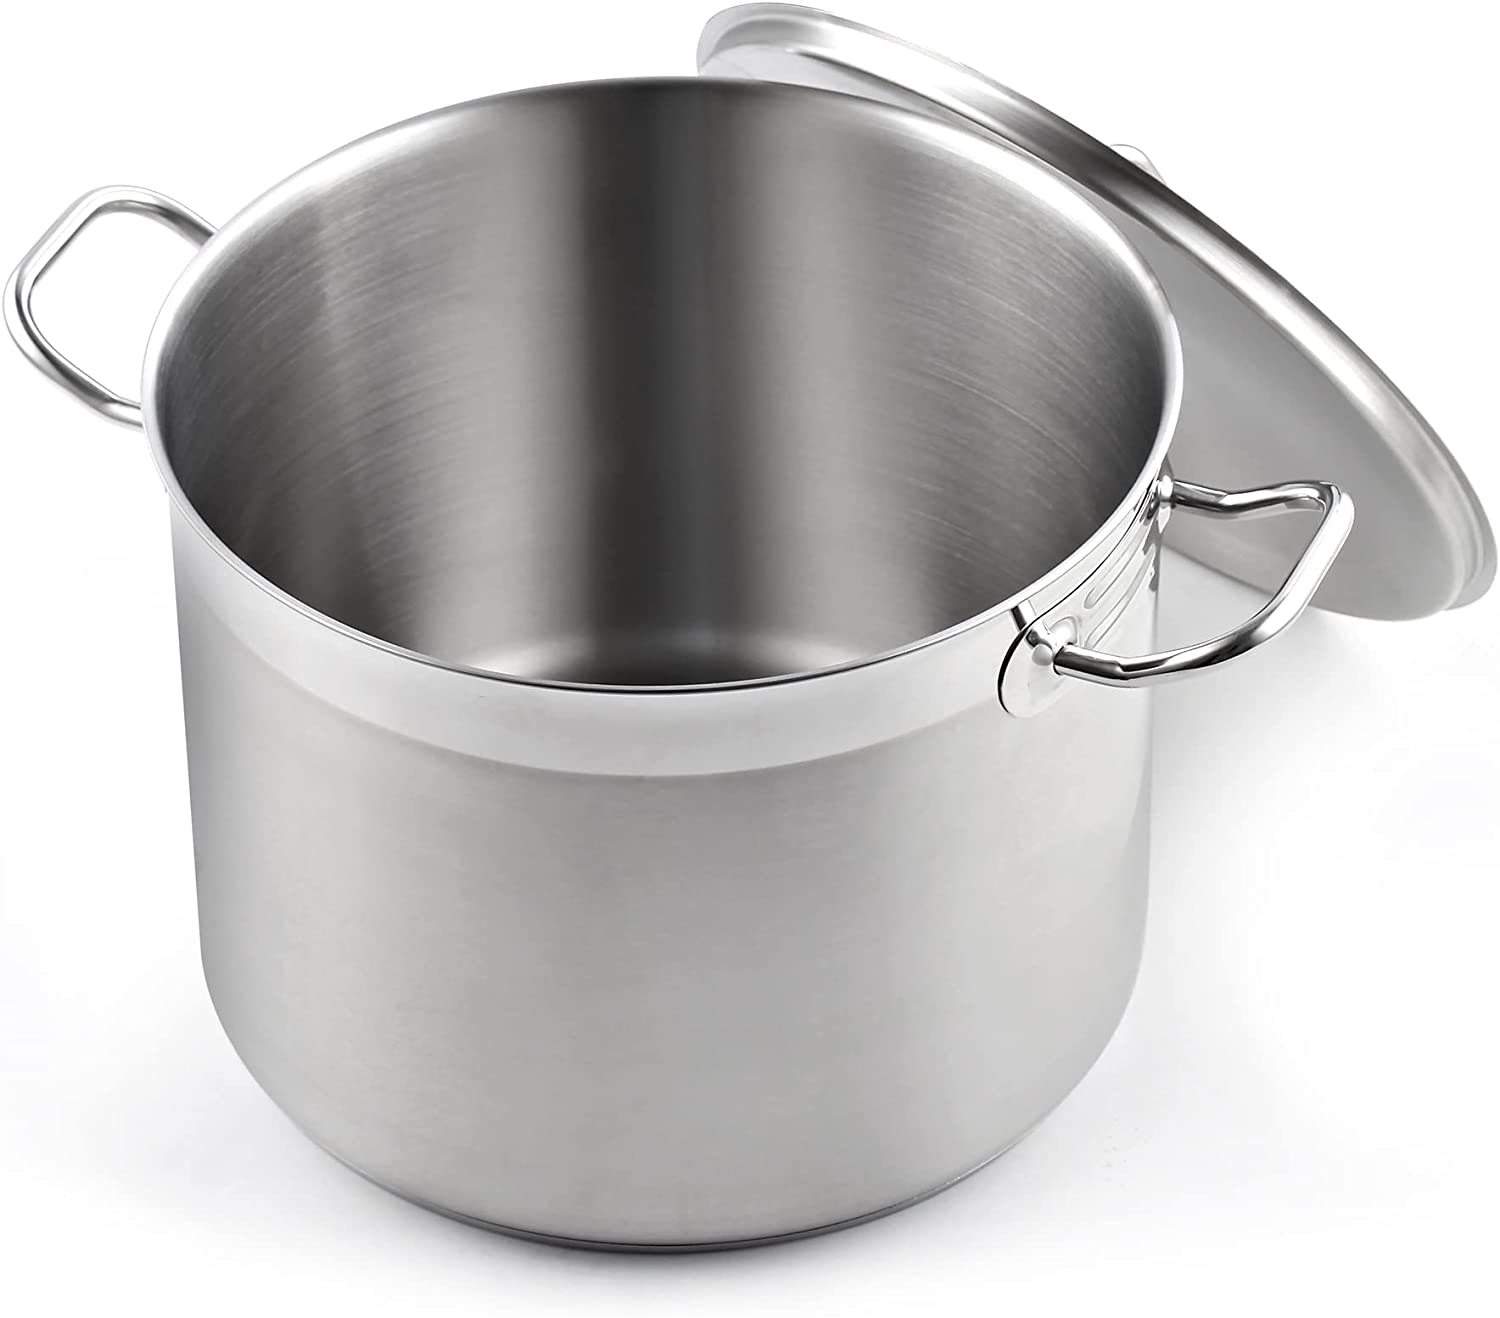 16 Qt Covered Stainless Steel Stock Pot